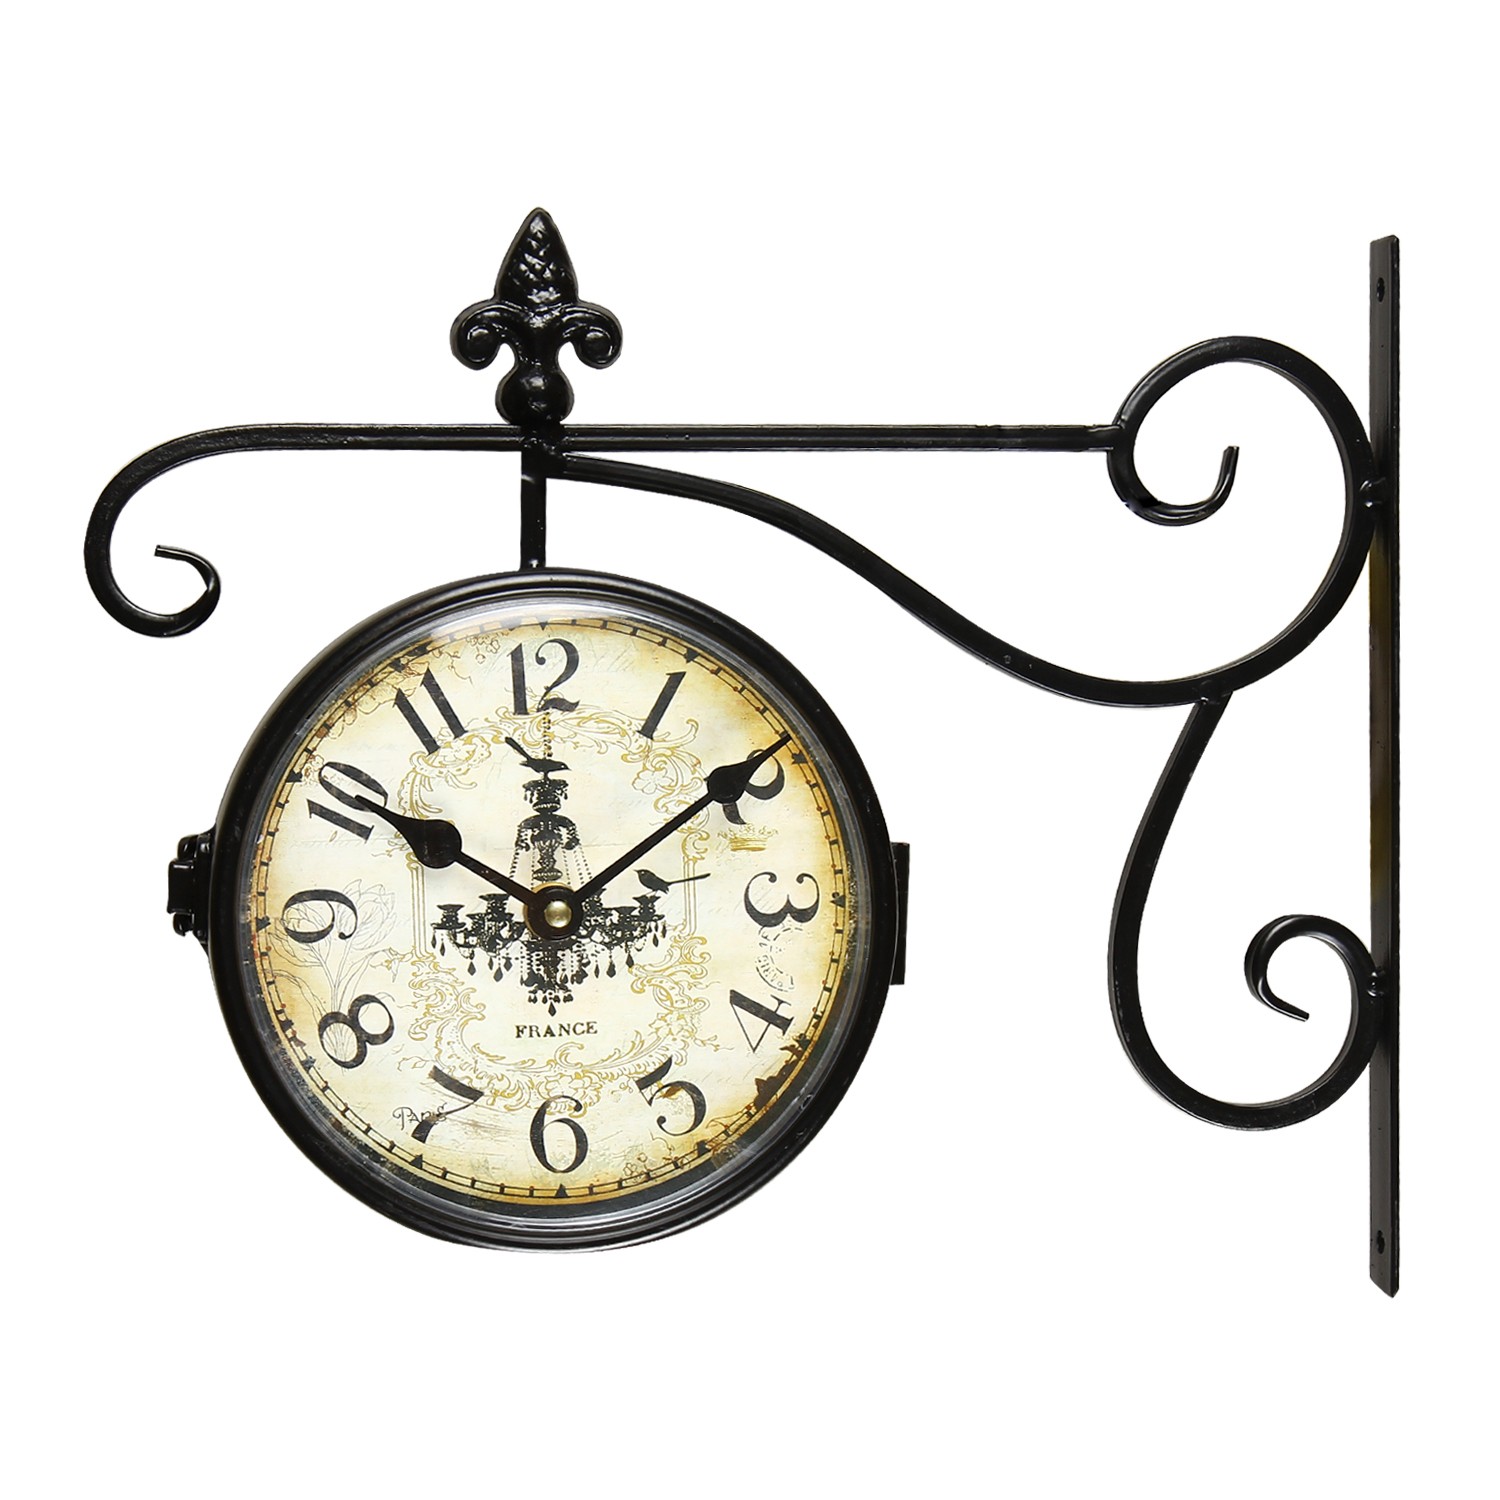 Adeco Black Iron Vintage-Inspired Round Chandelier Double-Sided Wall Hanging Clock with Scroll Wall Mount Home Decor